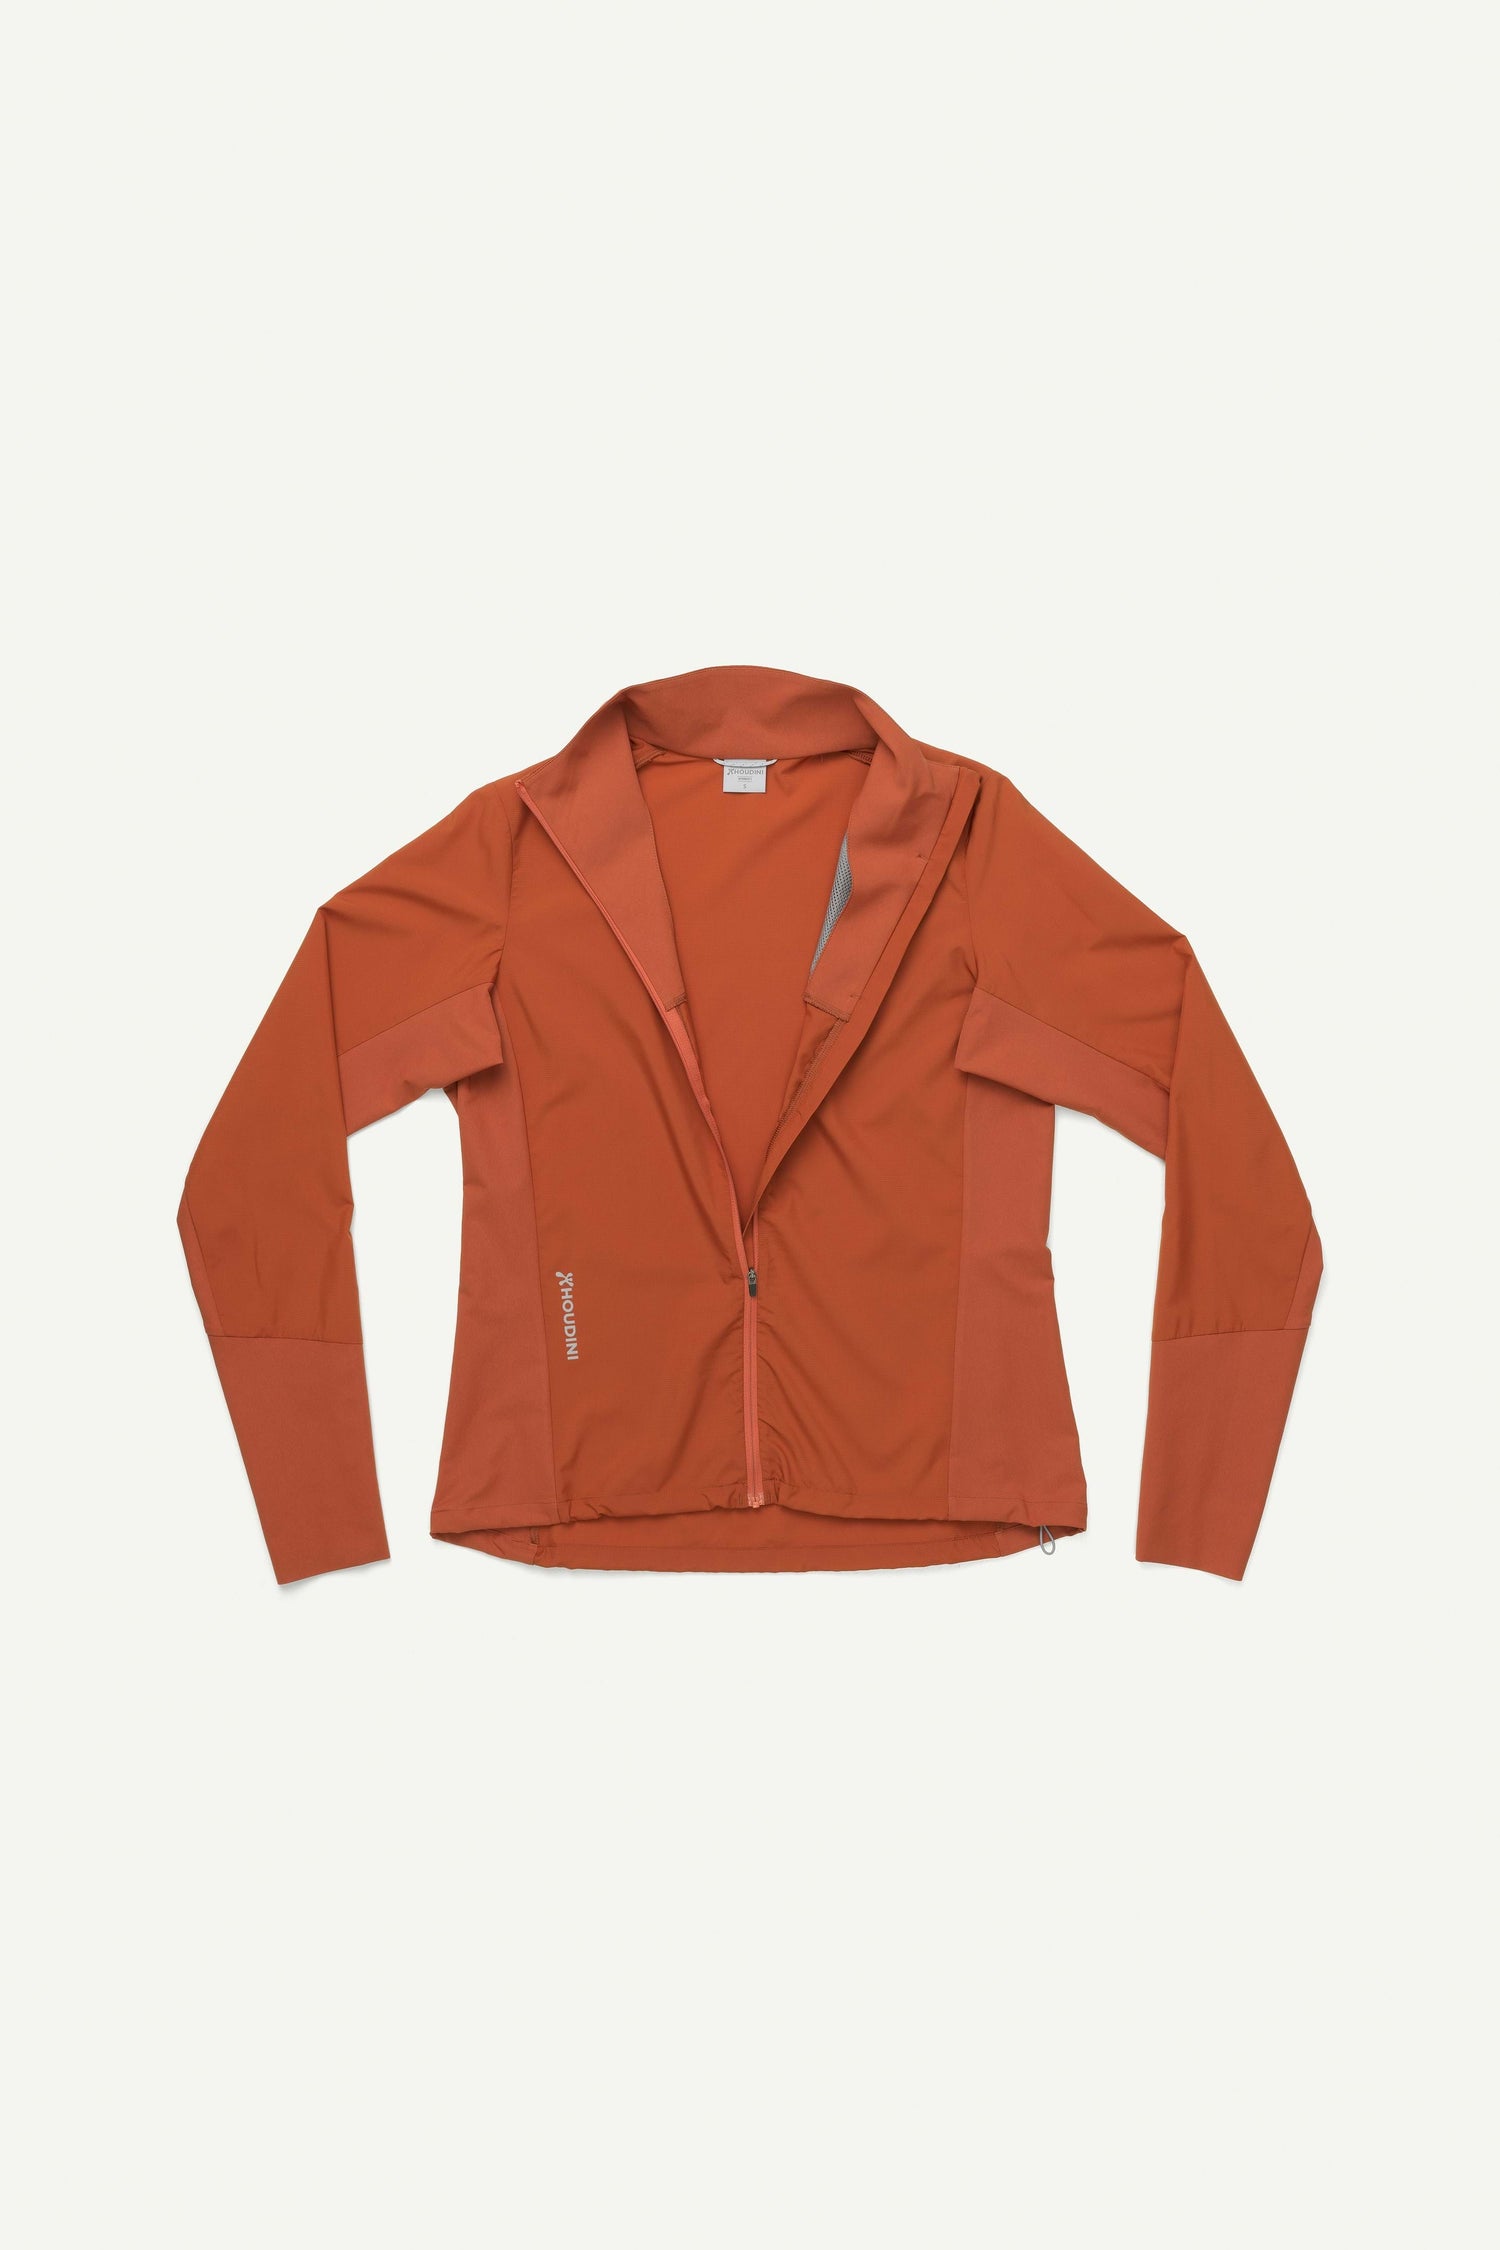 Houdini W's Pace Wind Jacket - 100% recycled polyester Mahogany Red Jacket